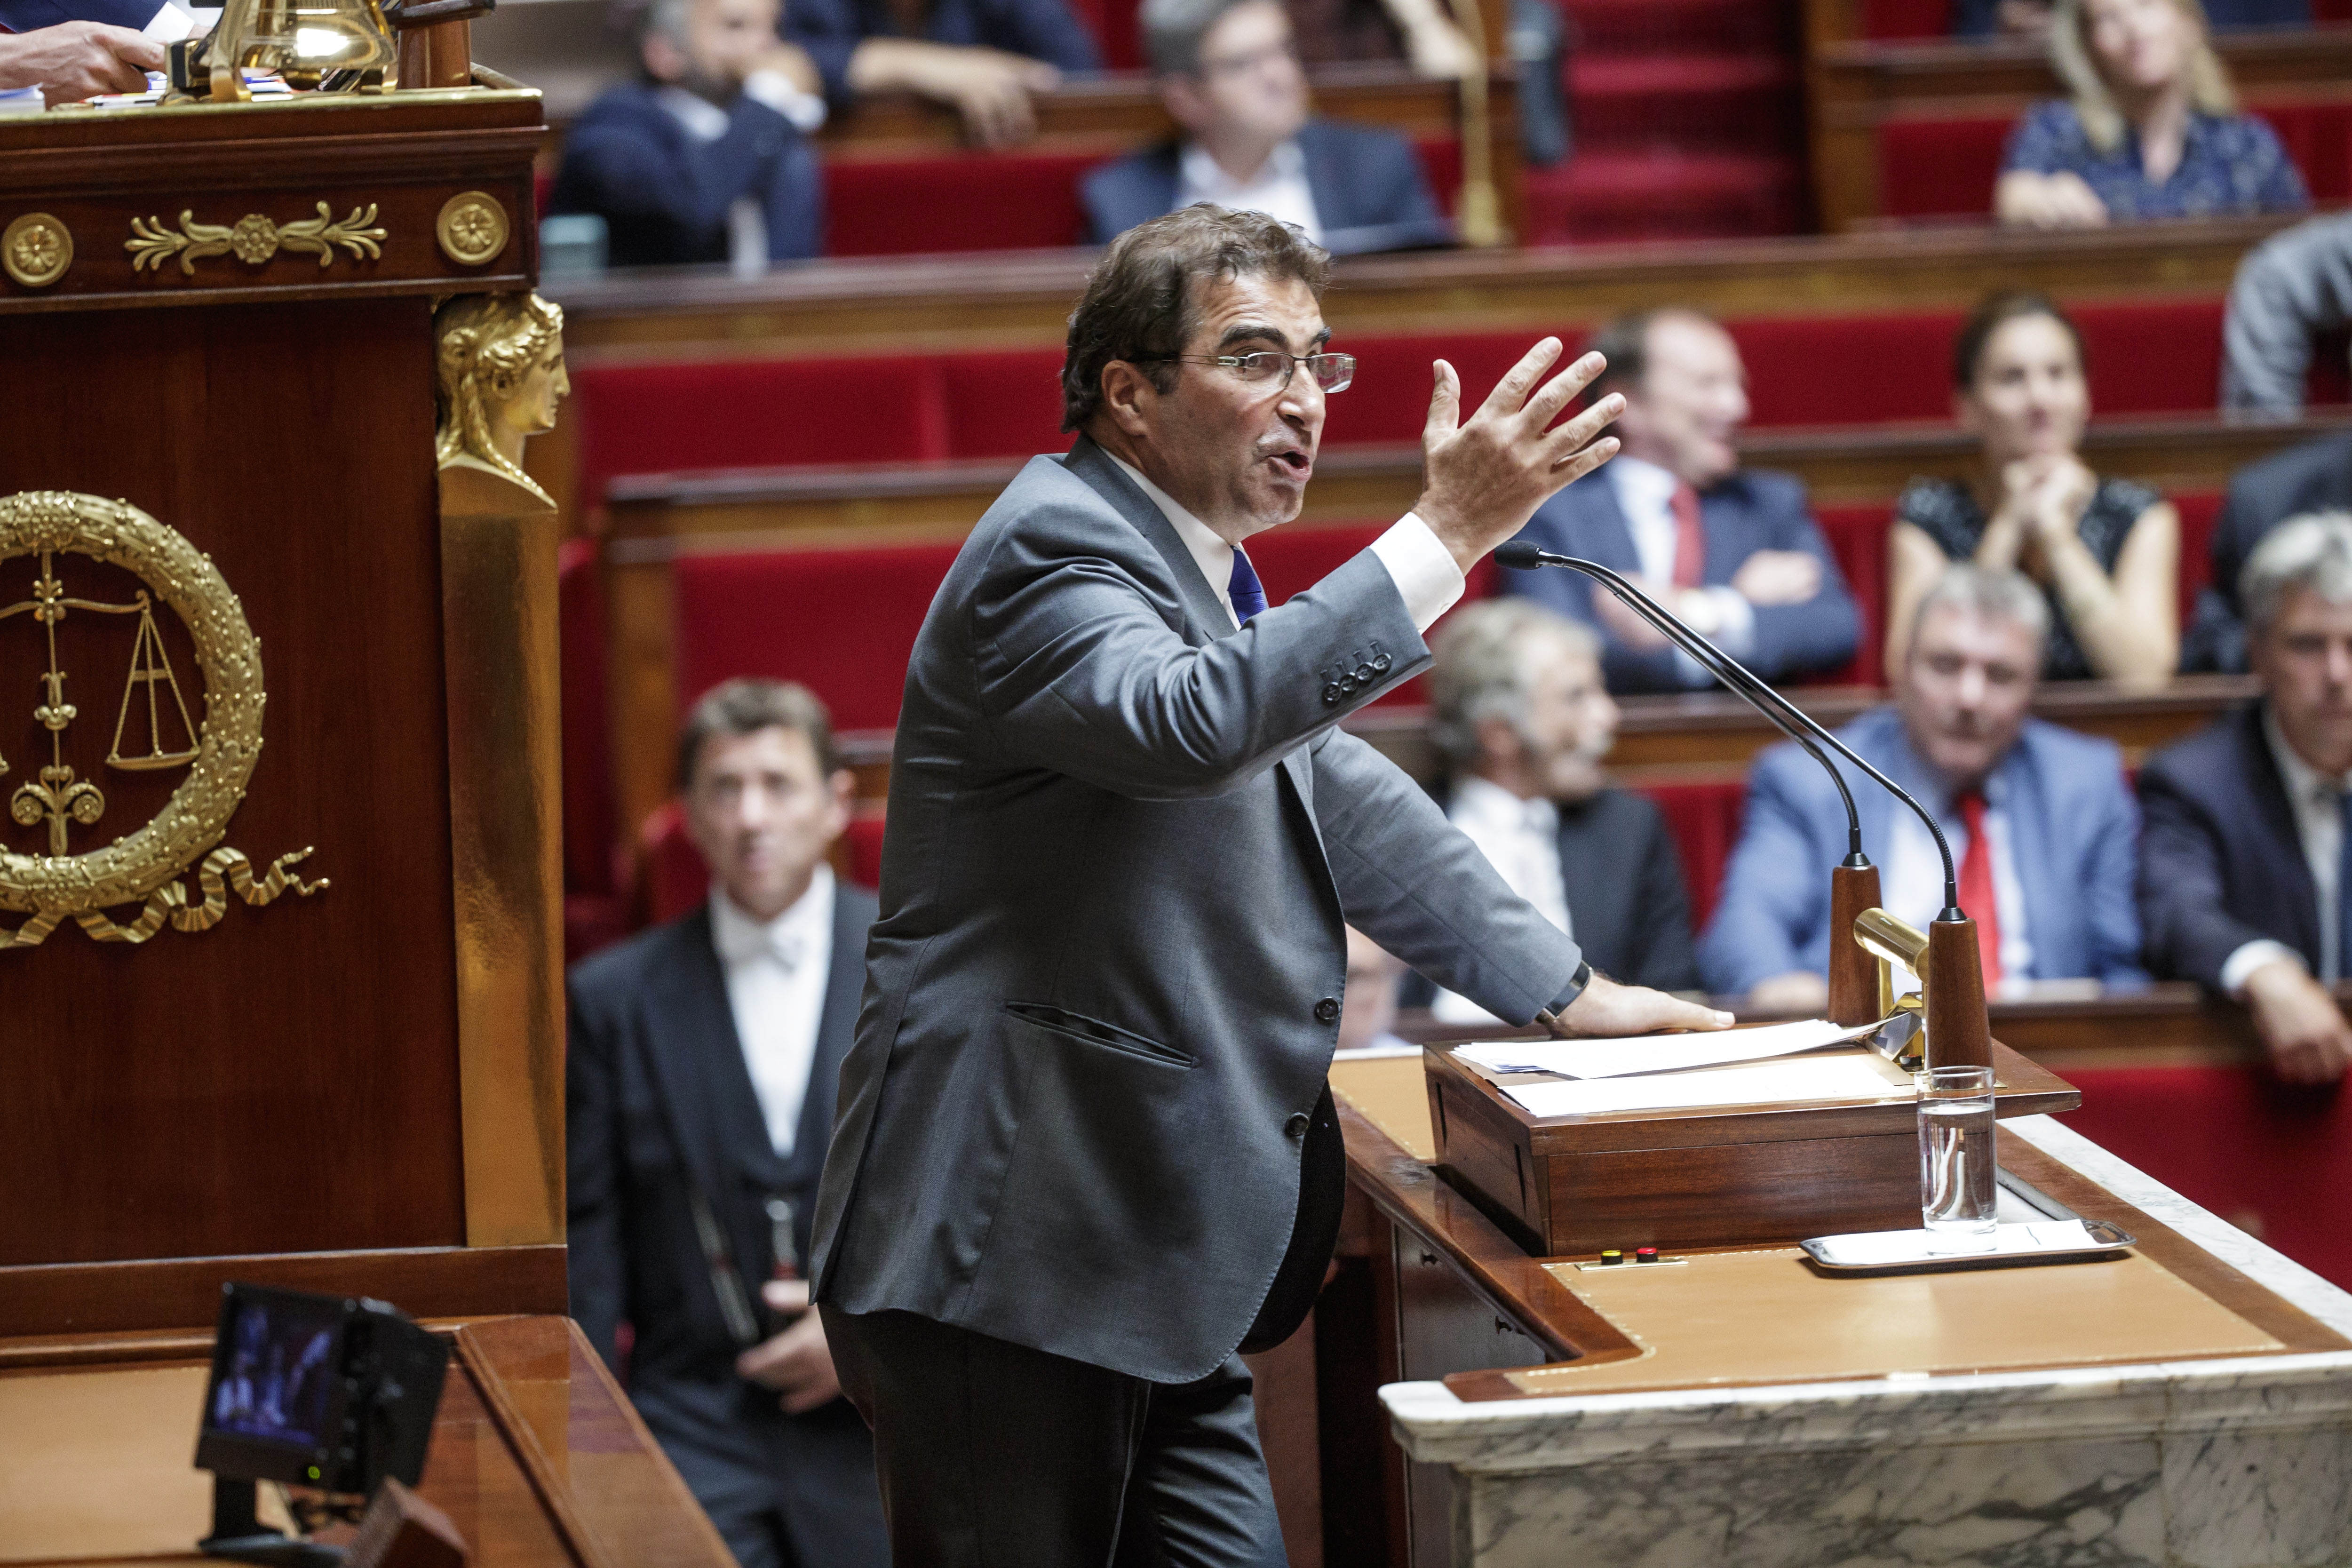 epa06920549 French right-wing party 'Les Republicains' group president Christian Jacob (C) delivers a speech during a debate prior to a non-confidence vote against the government at the National Assembly in Paris, France, 31 July 2018. Parliamentary proceedings are disrupted by opposition MPs following the scandal of President Macron's security chief Alexandre Benalla after a video has been released on 19 July 2018 showing Benalla wearing a riot helmet and police uniform, allegedly attacking protesters during street demonstrations on 01 May 2018.  EPA/CHRISTOPHE PETIT TESSON